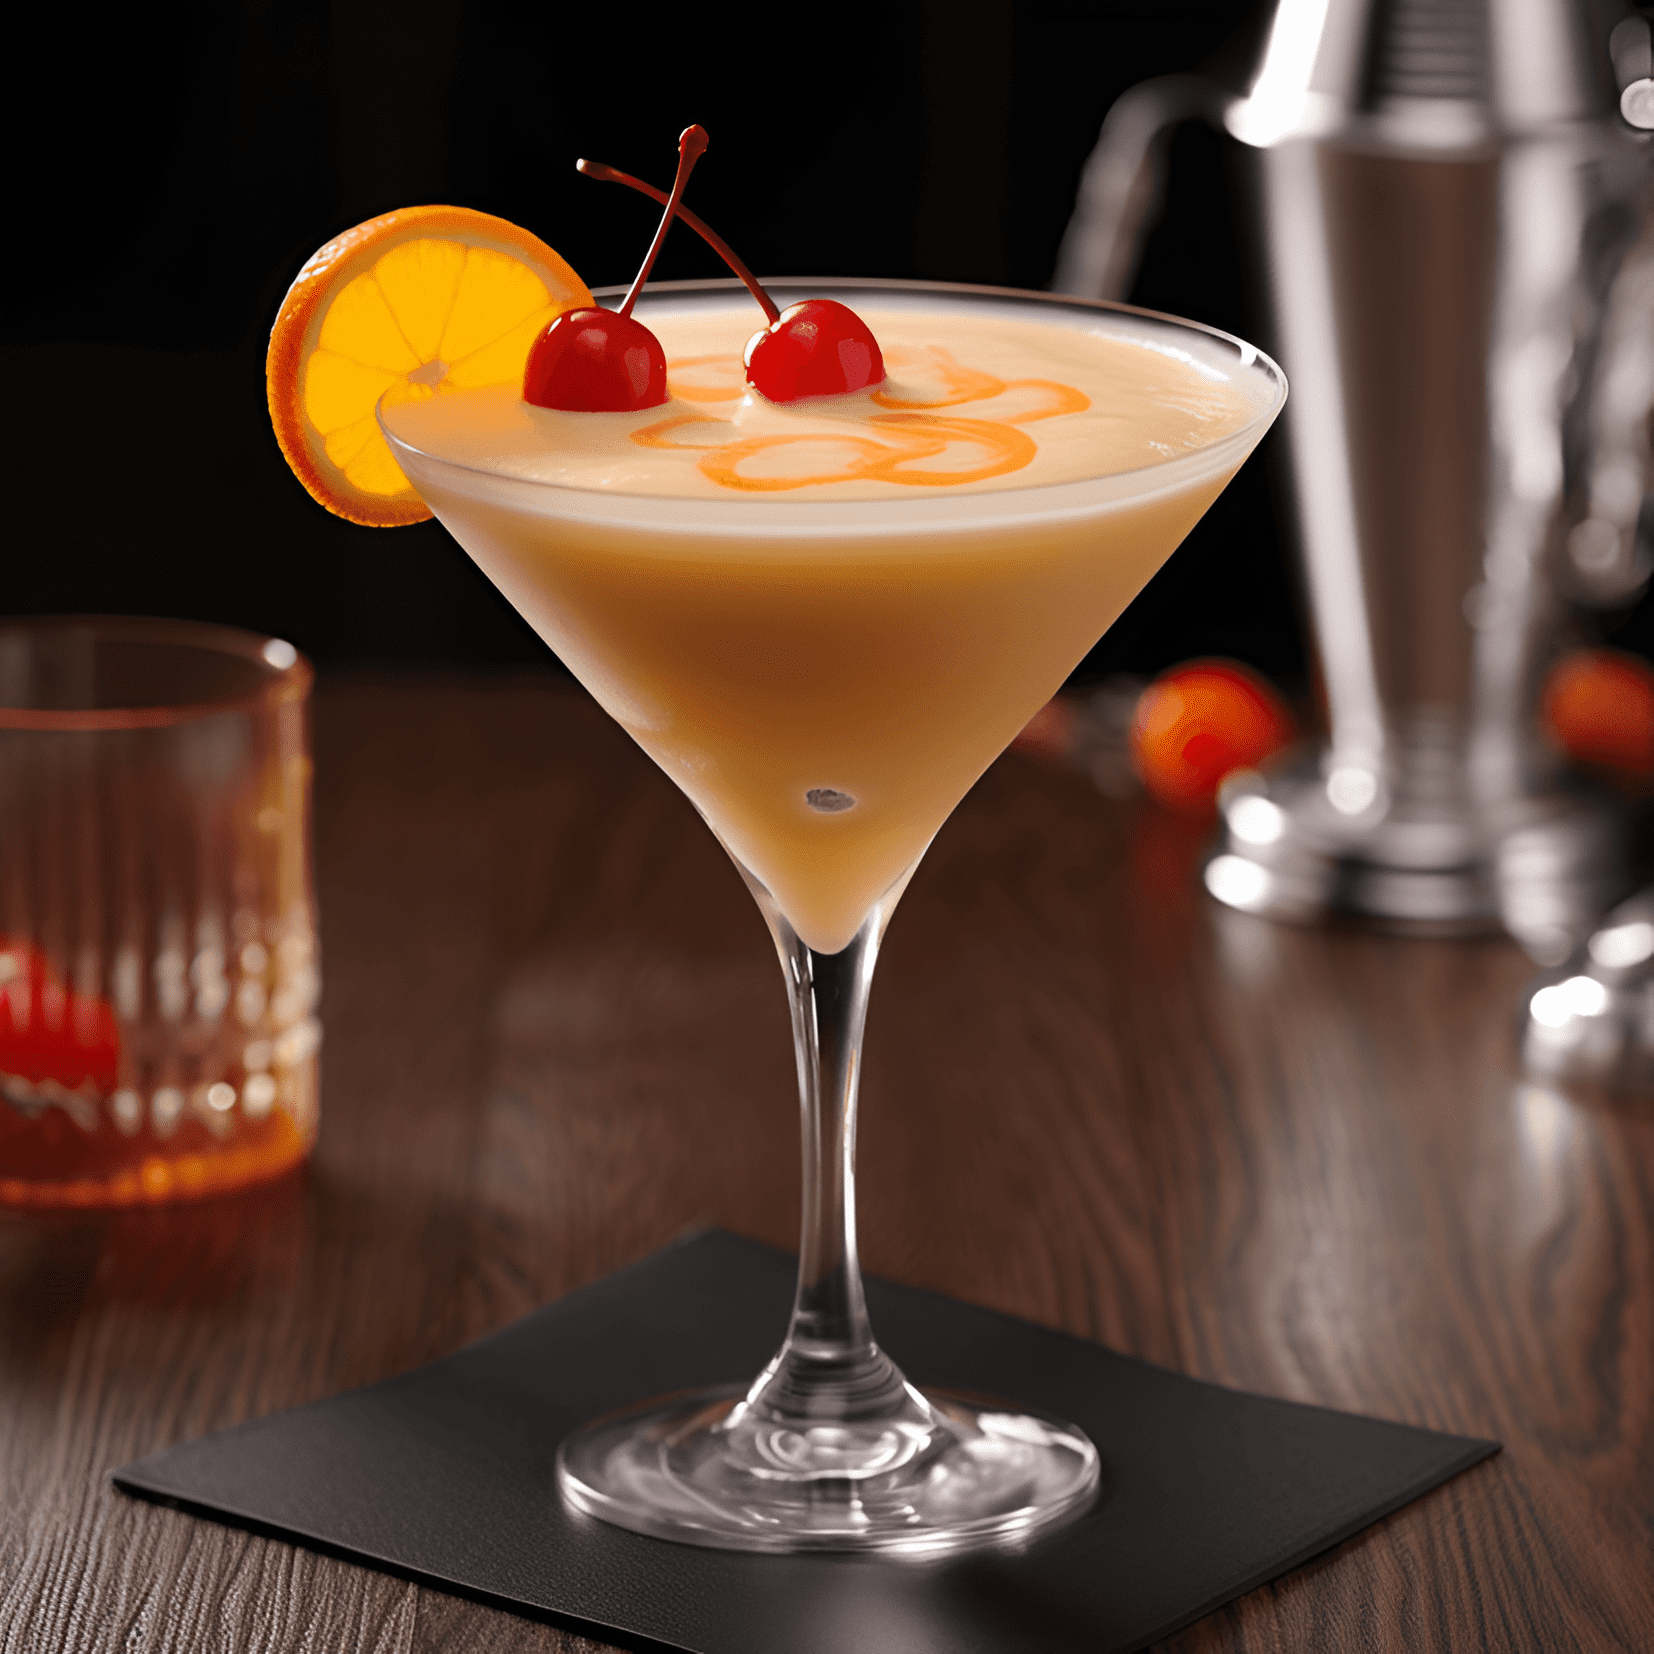 Orange Whip Cocktail Recipe - The Orange Whip has a sweet, tangy, and creamy taste with a hint of vanilla. The combination of orange juice, cream, and vanilla creates a smooth and refreshing flavor profile.